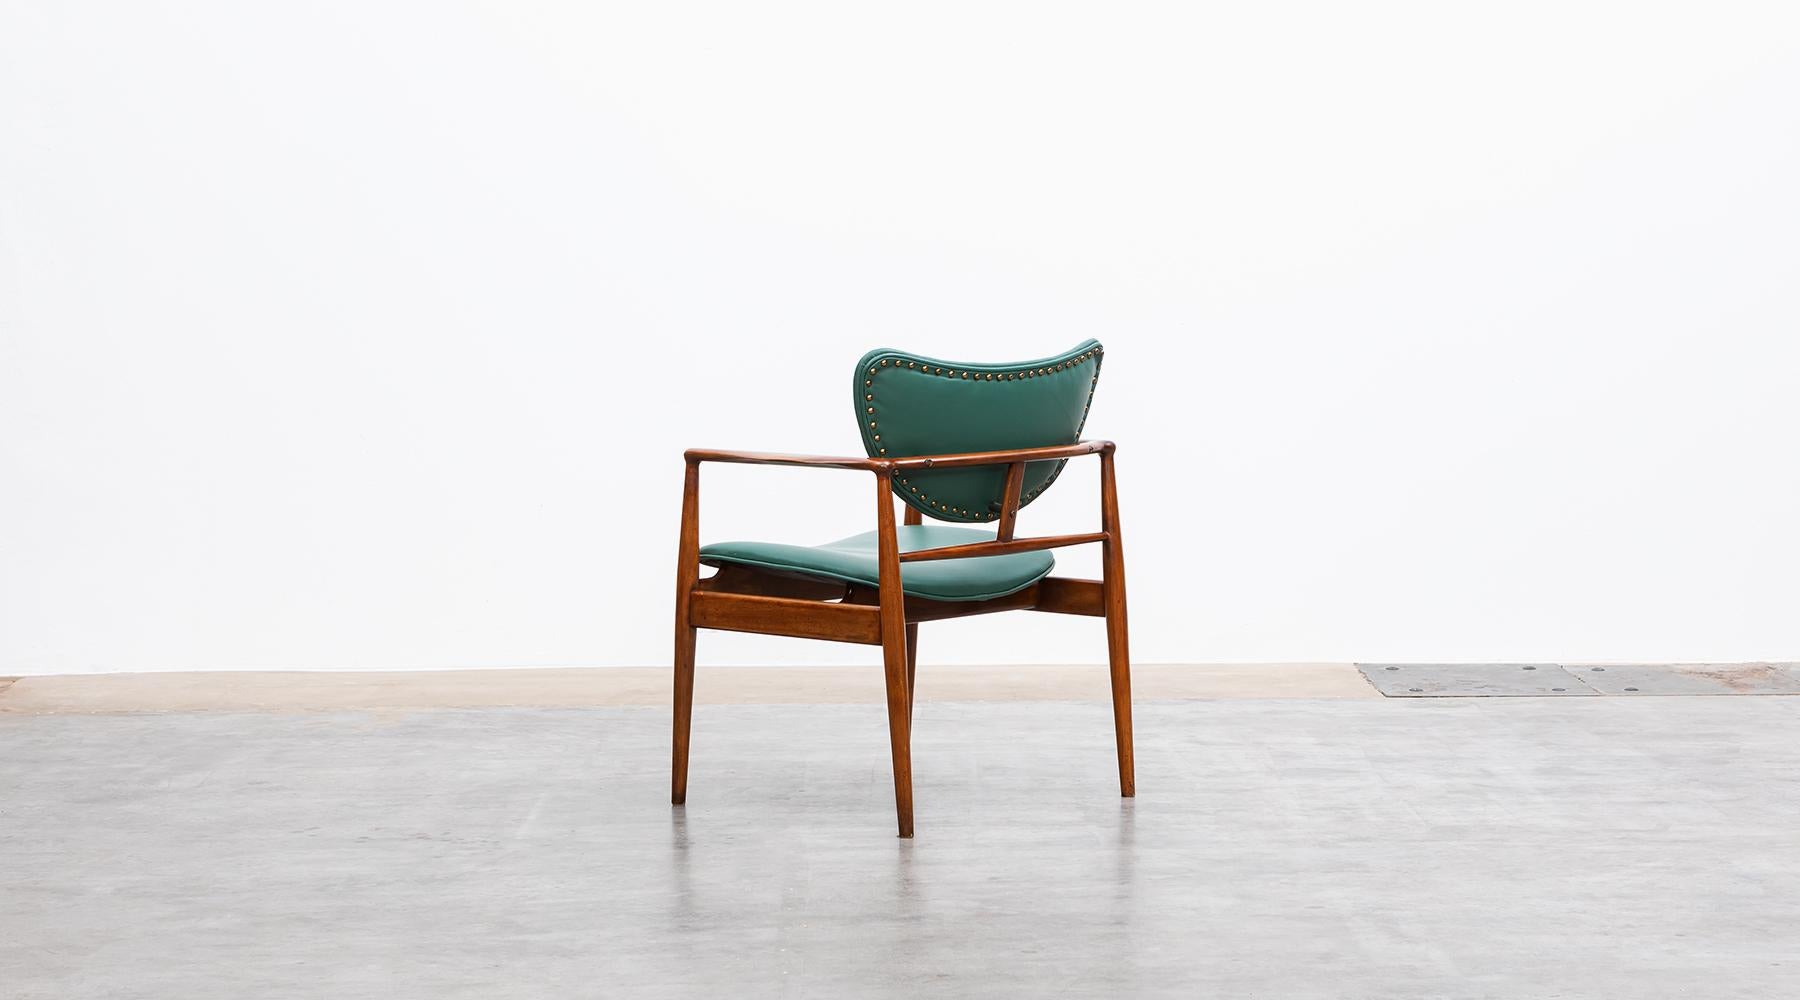 1950s Teak and green faux leather Chair by Finn Juhl For Sale 2